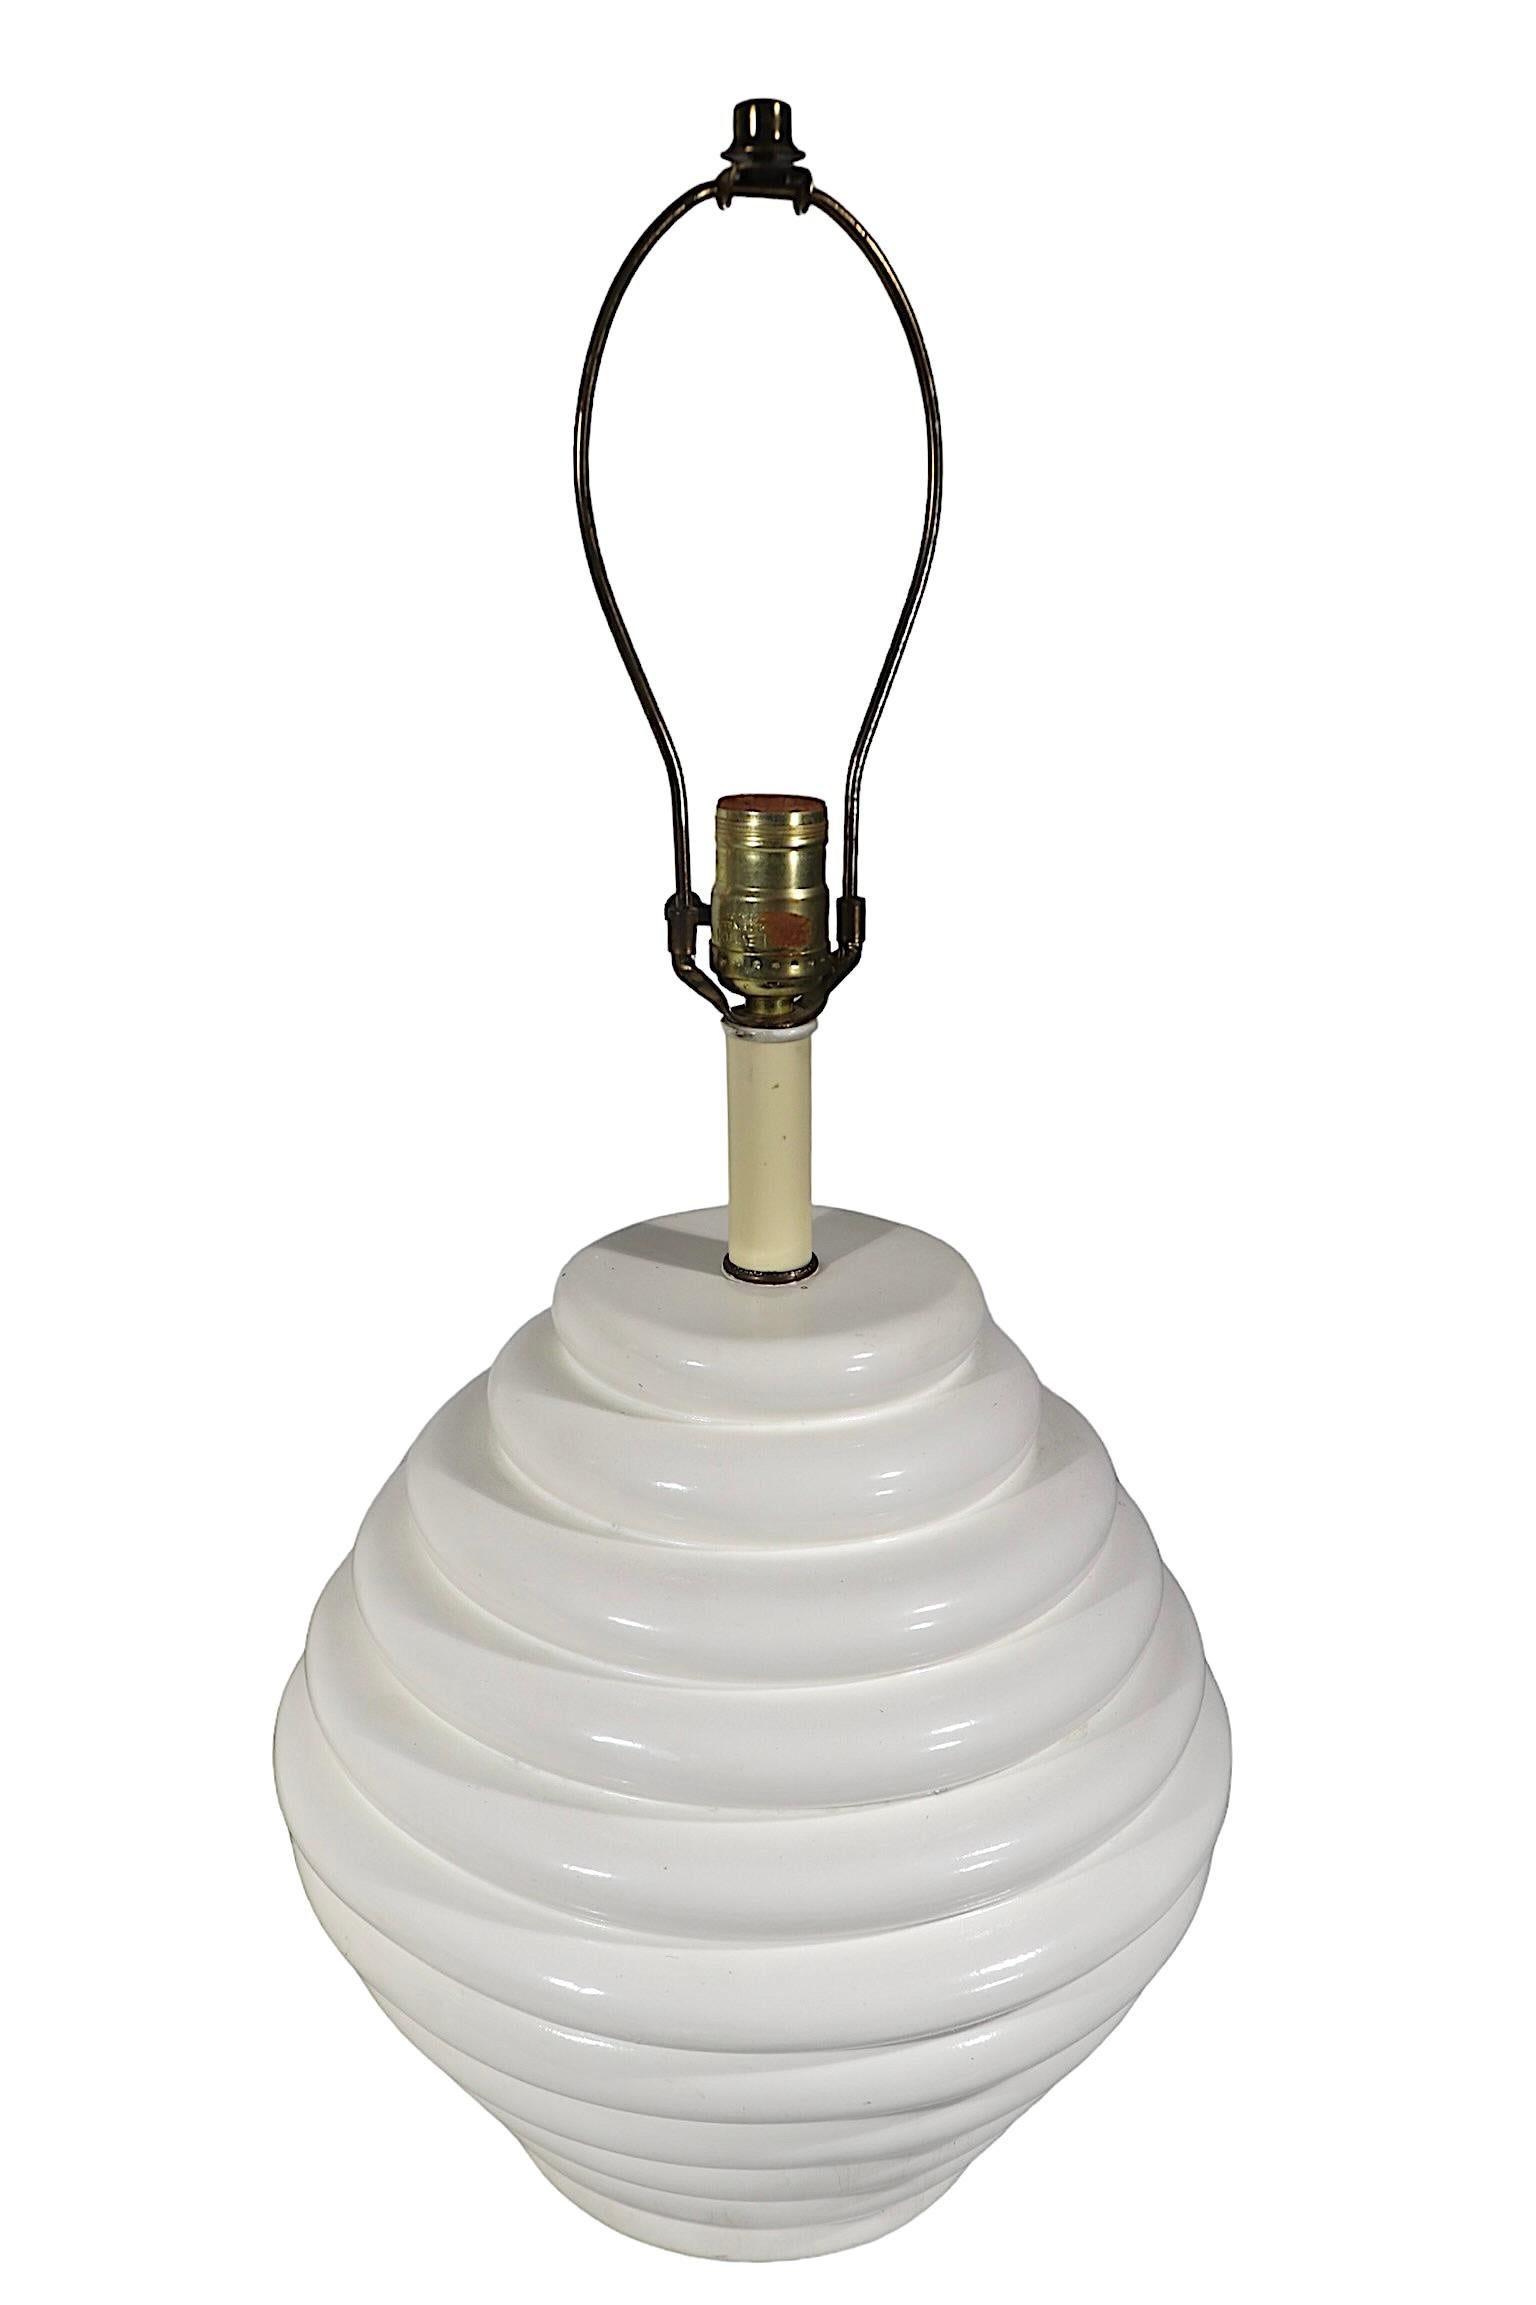 Pr. Mid Century Space Age Bulbous Form Table Lamps in White Finish c. 1950/70's For Sale 1